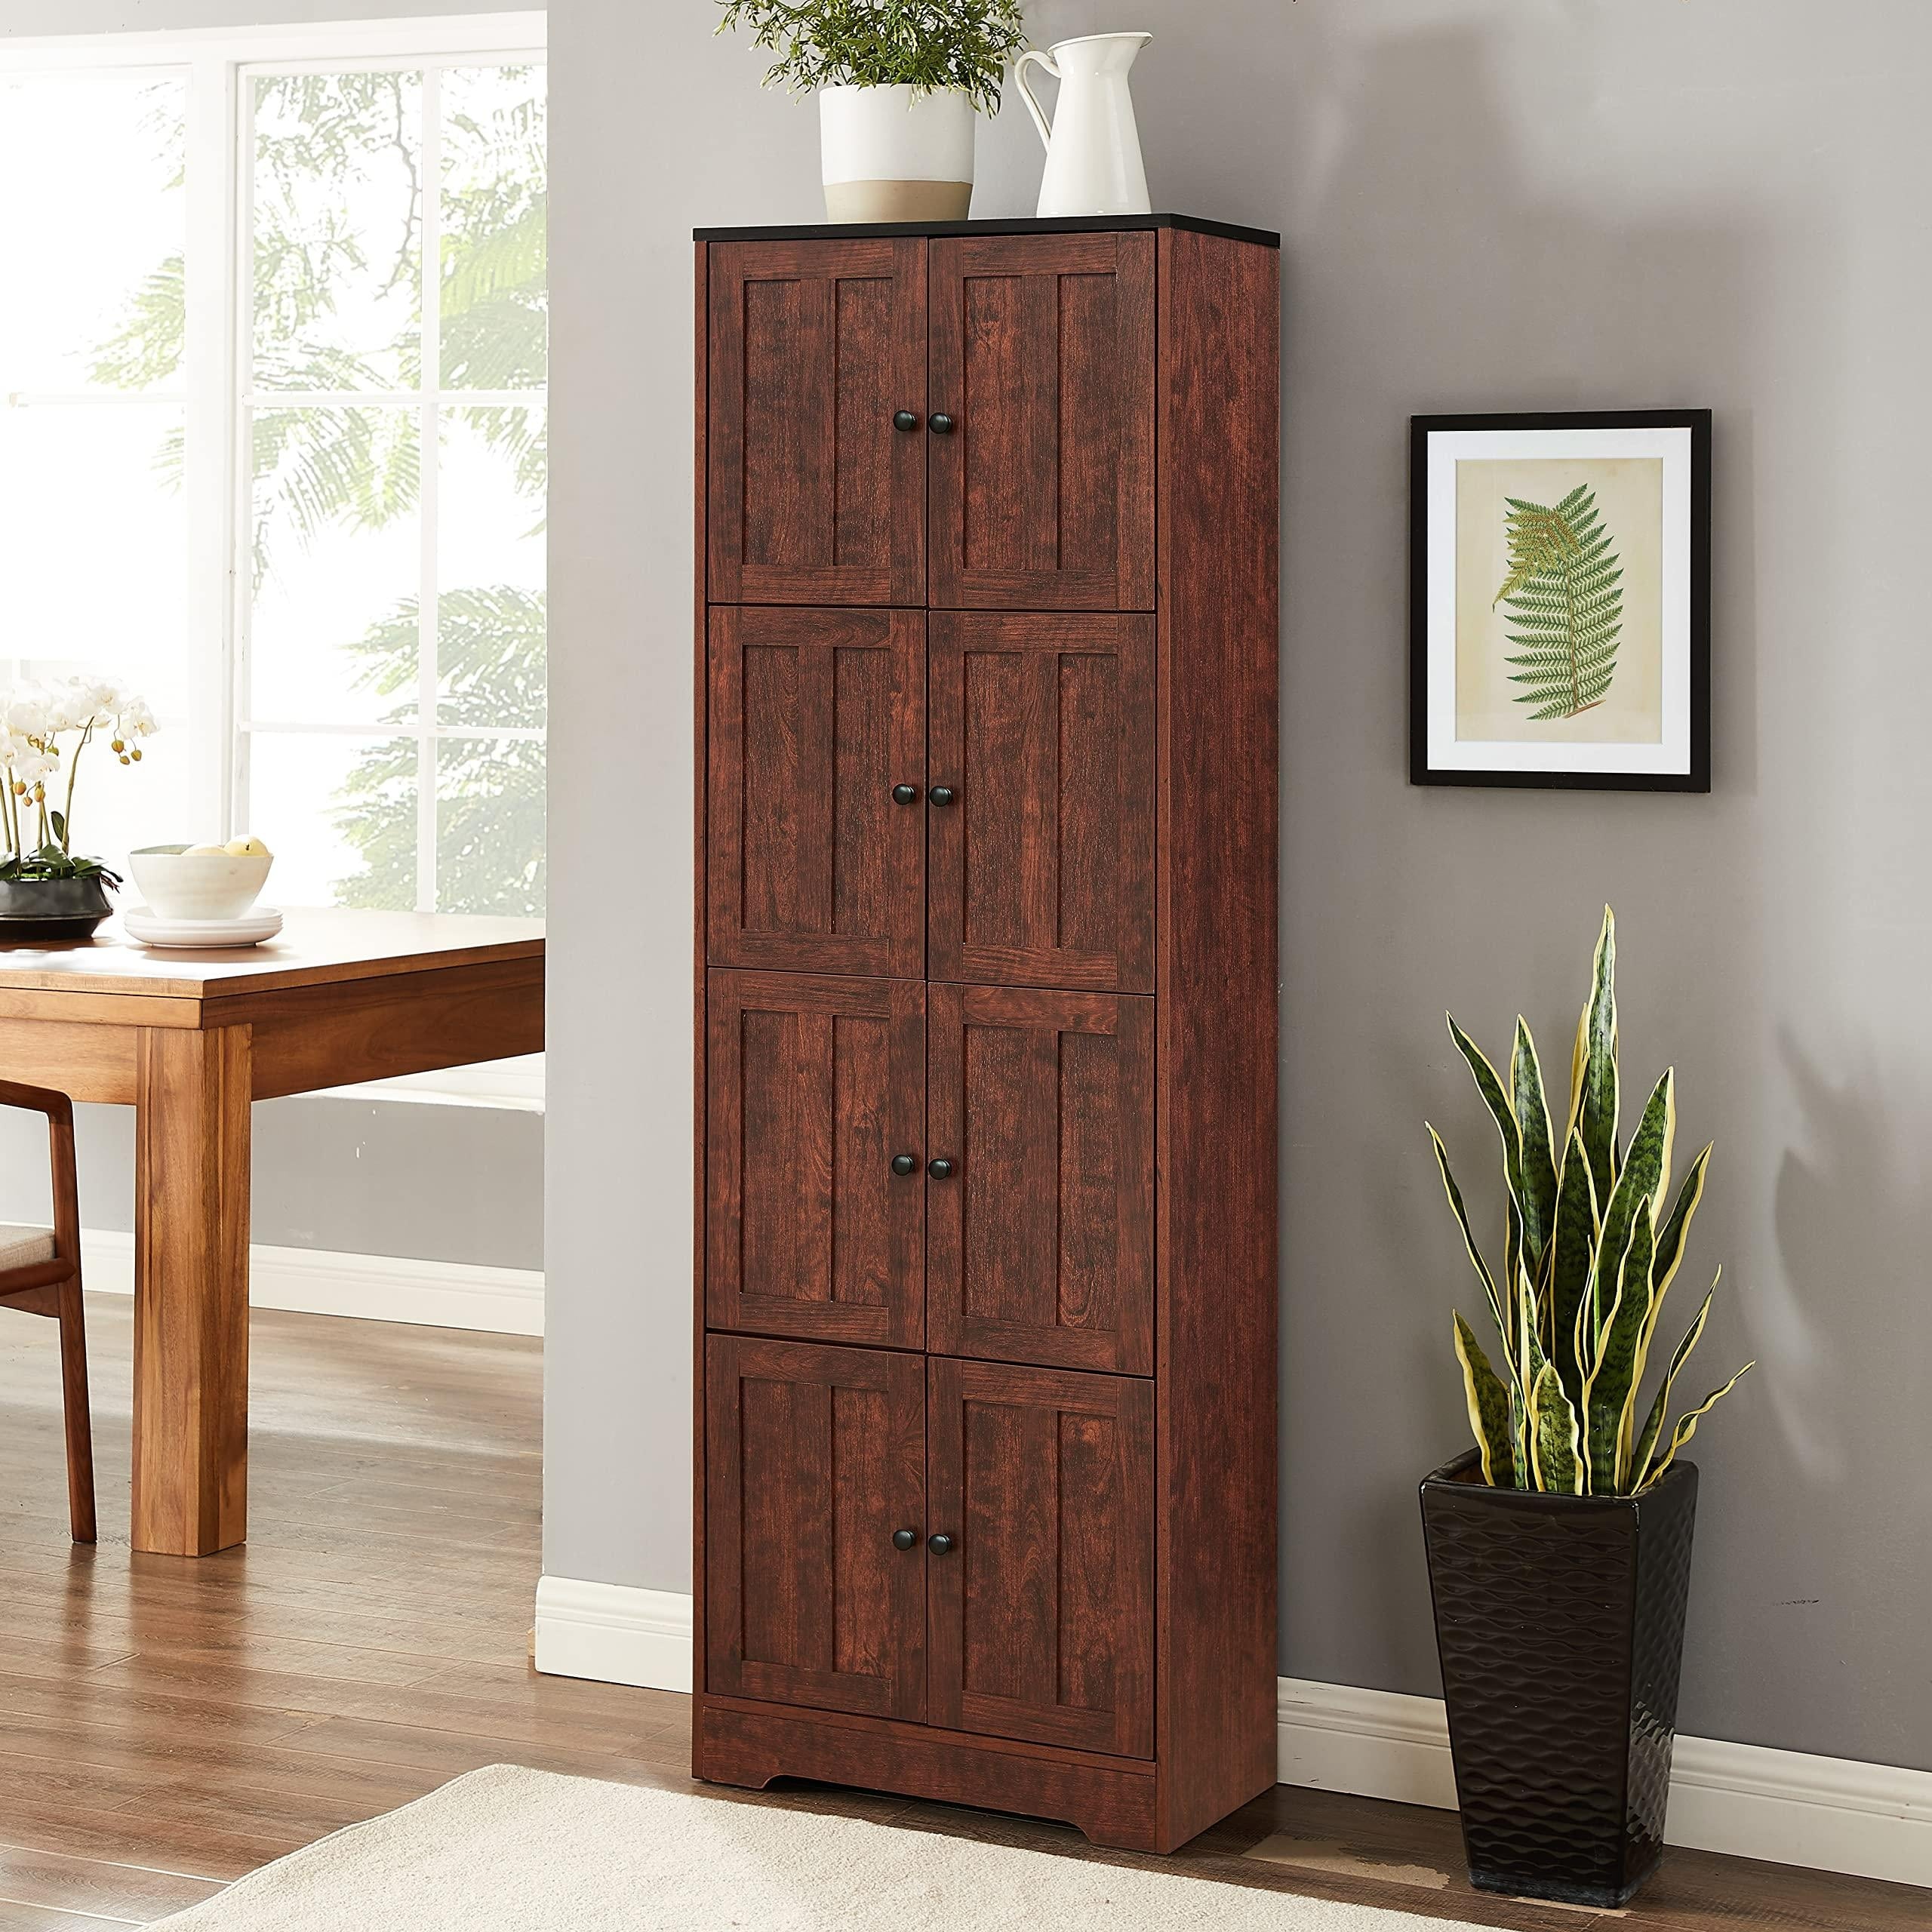 https://ak1.ostkcdn.com/images/products/is/images/direct/1d1aaa70e8655e7875515a12739d3f3b7061ace9/Modern-Tall-Storage-Cabinet-with-Doors-and-Shelves%2C-Freestanding-Cabinet%2C-Bathroom-Cabinet%2C-Floor-Cabinet.jpg